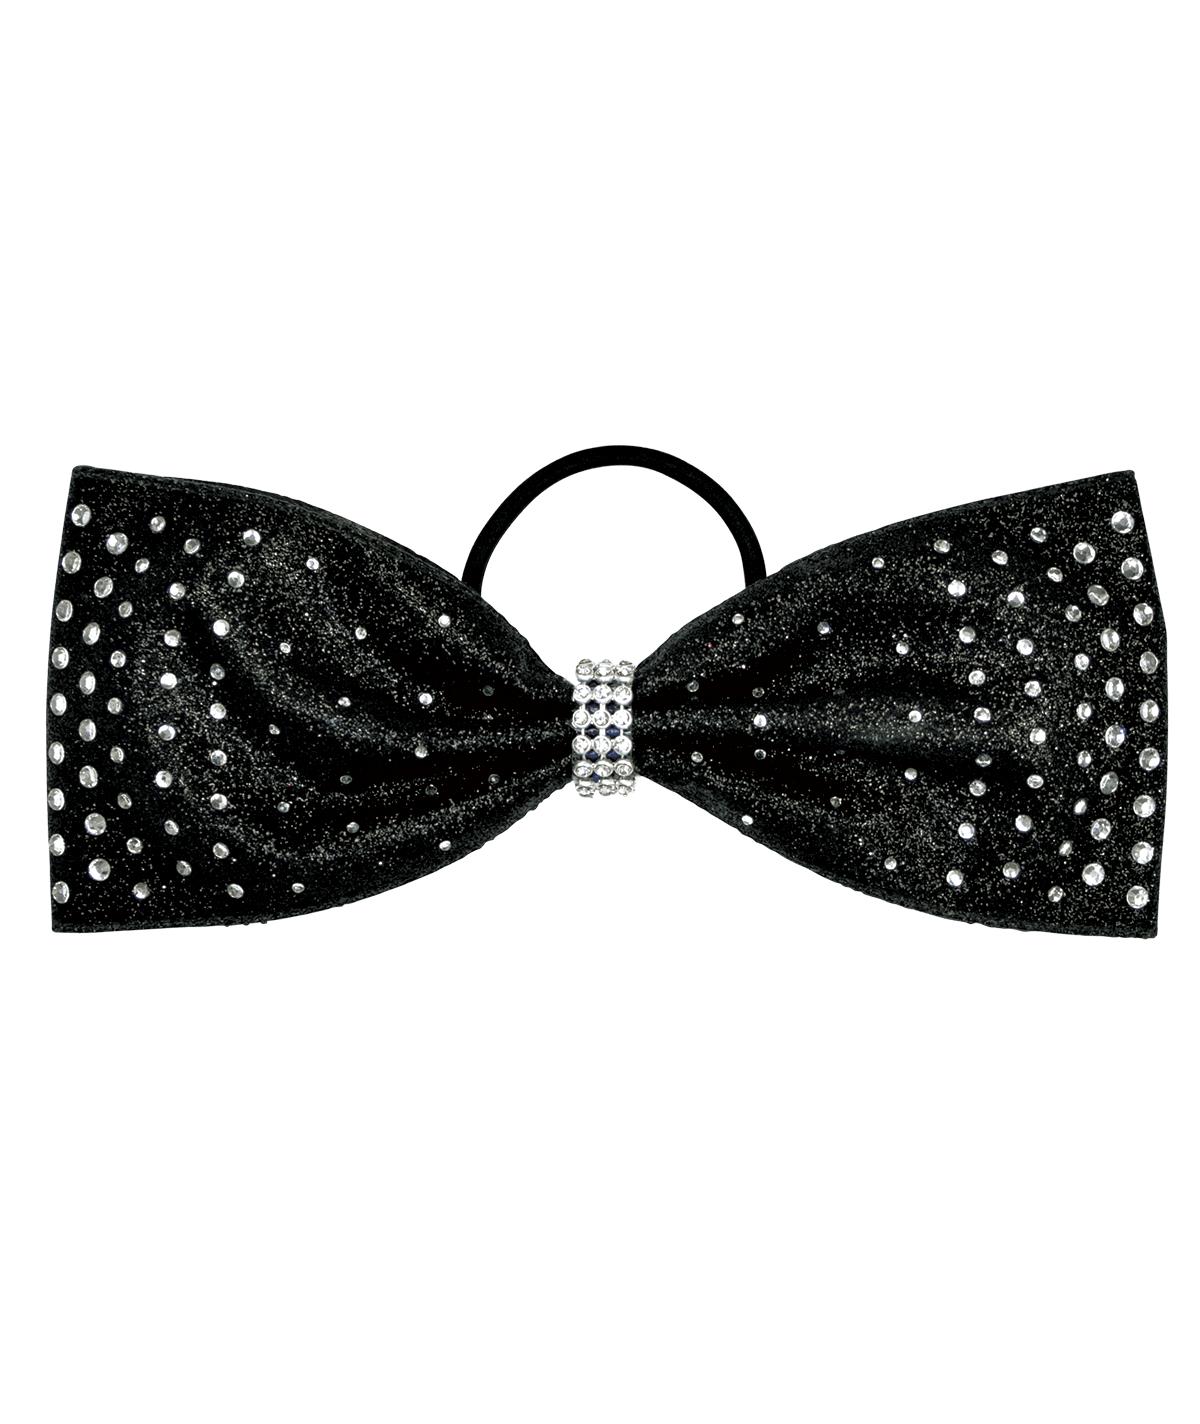 Black and Gold Sequin Tailless Cheer Bow